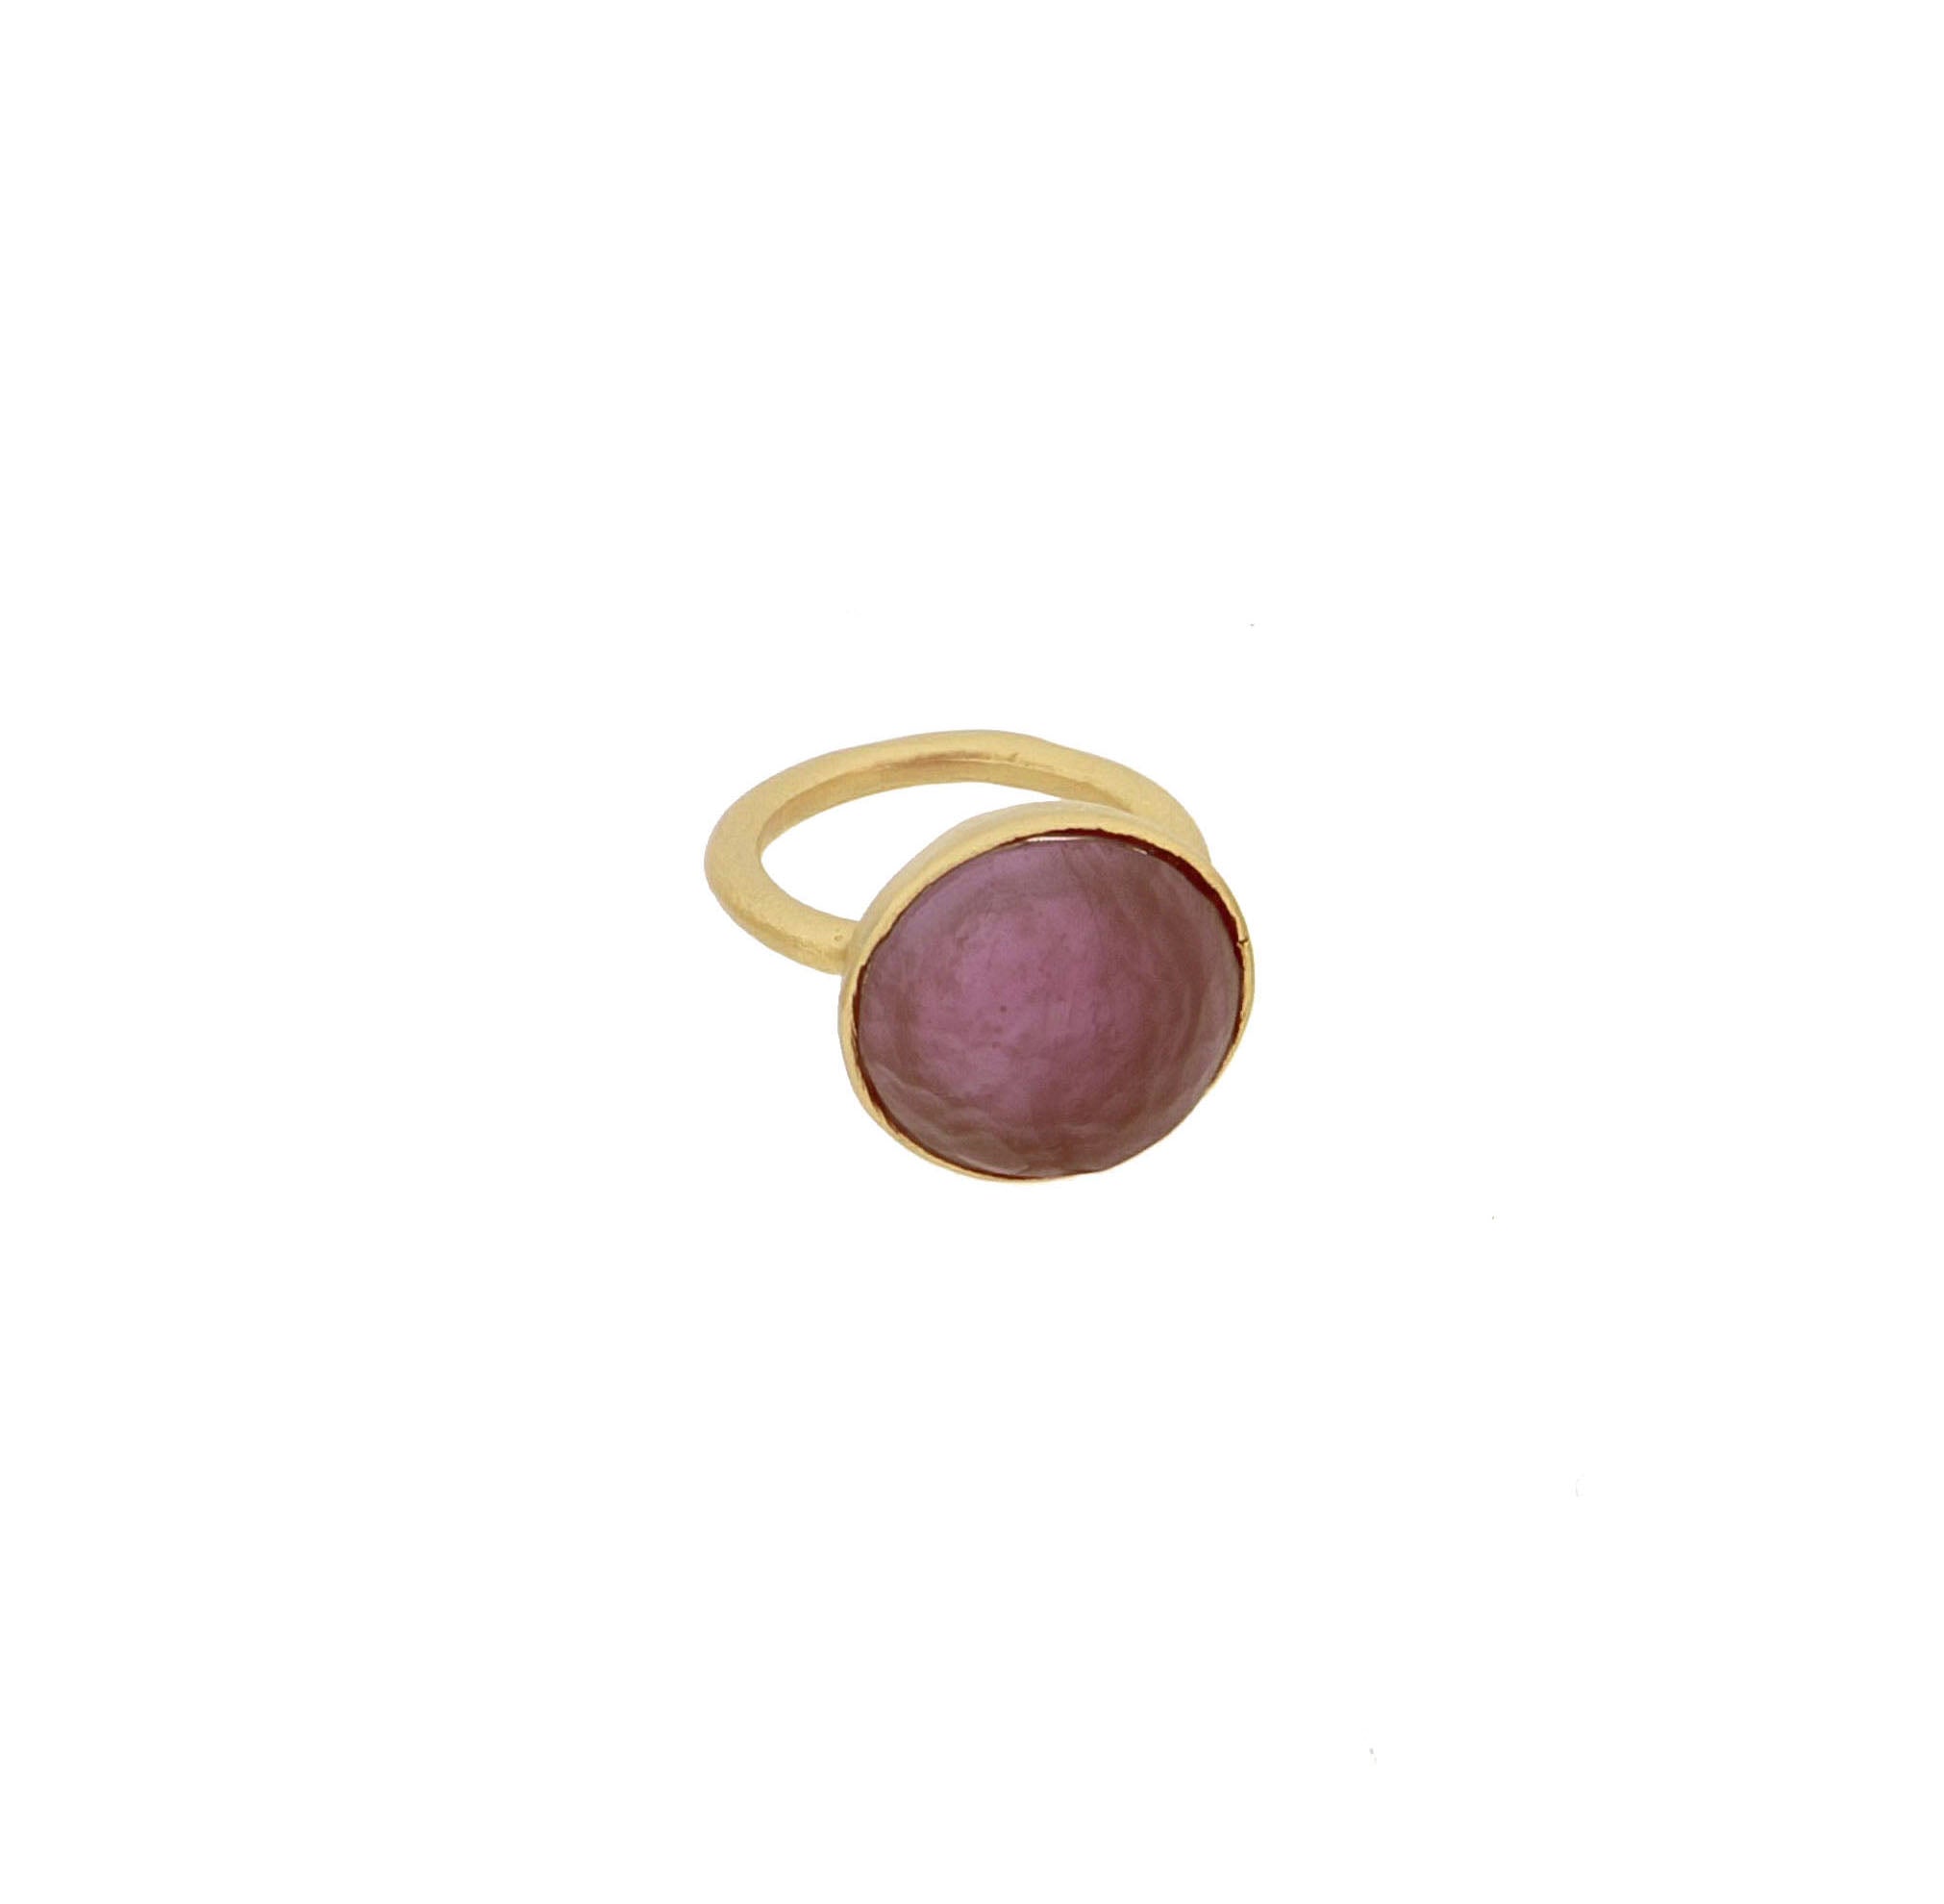 24k gold ring with purple glass